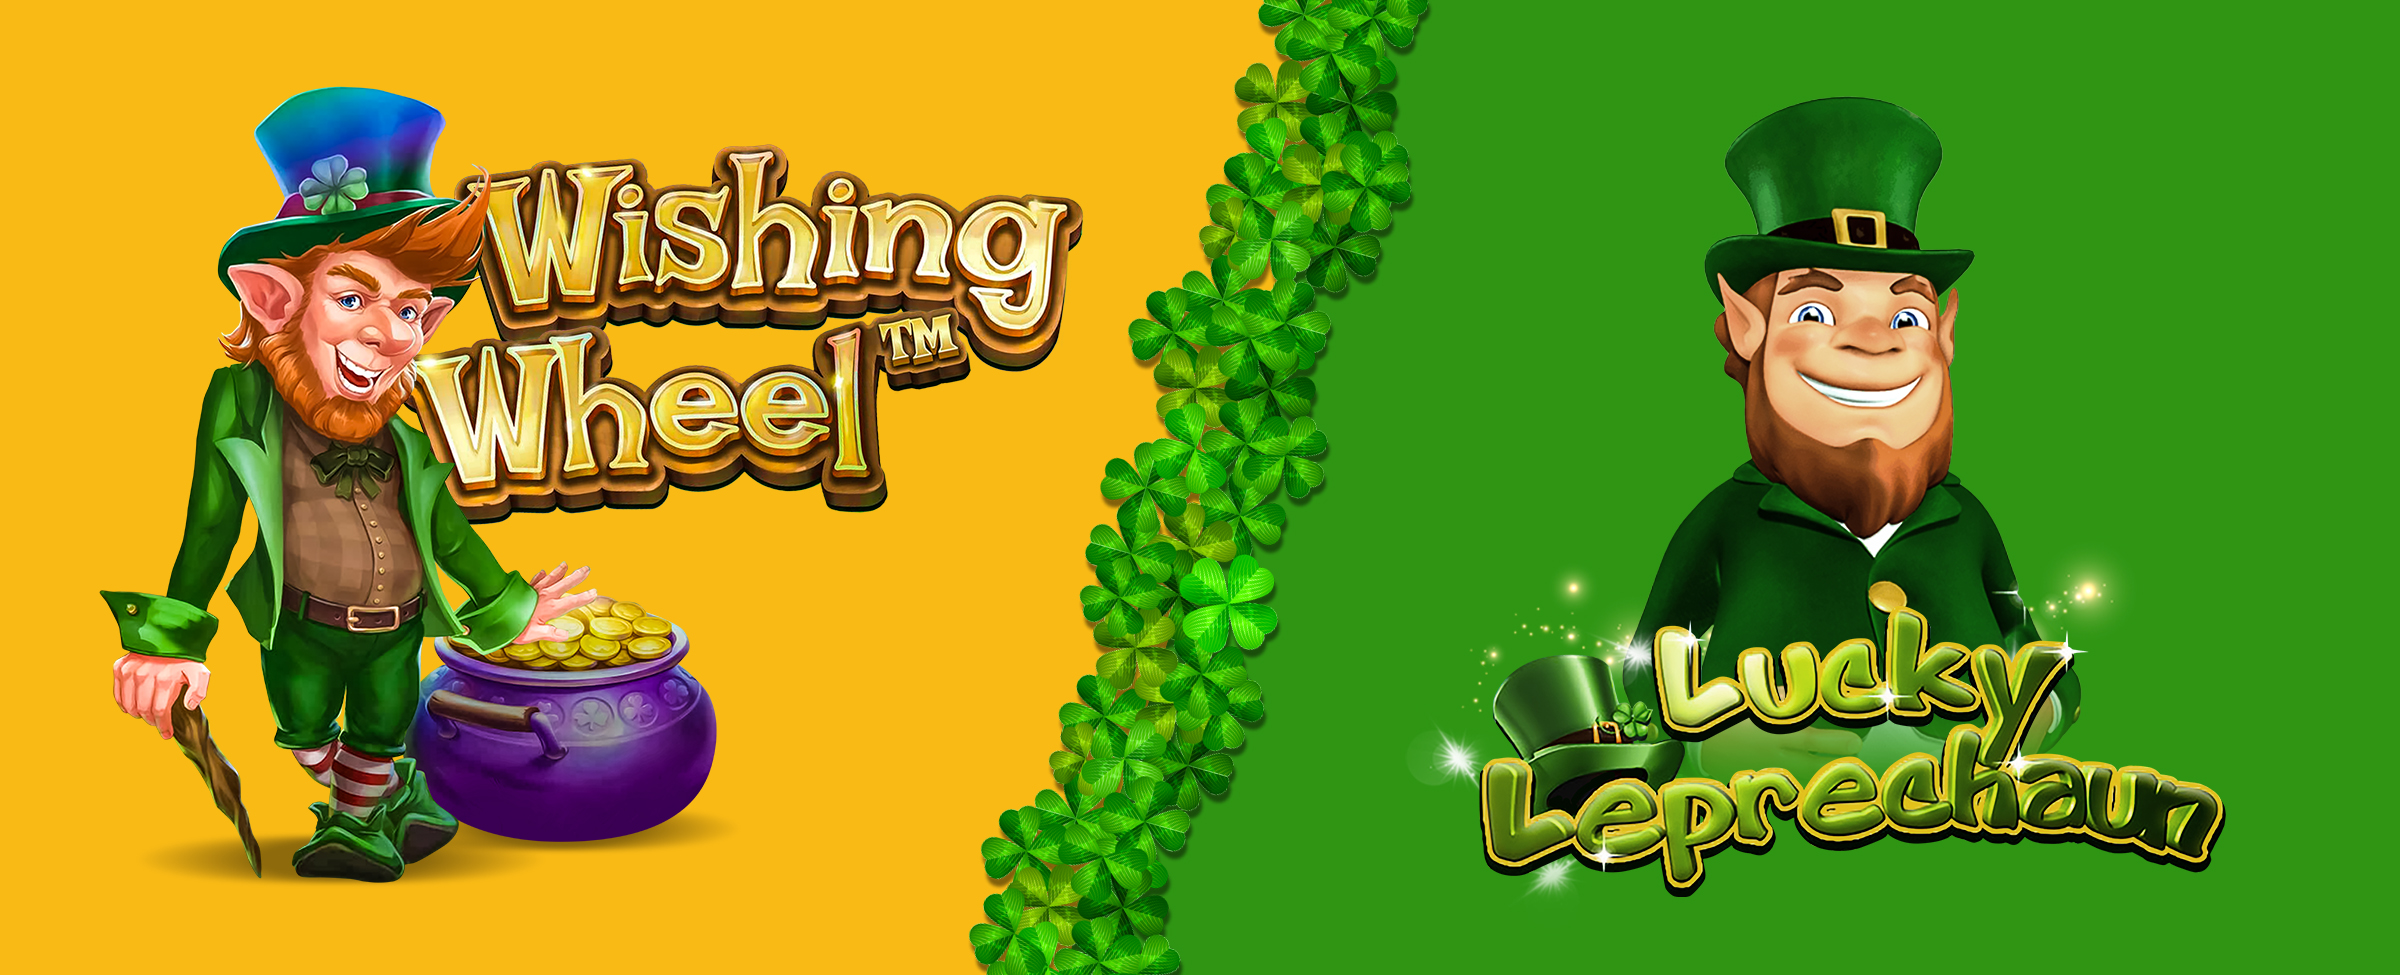 If you’re never played Wishing Wheel or Lucky Leprechaun, now’s the time to climb aboard.